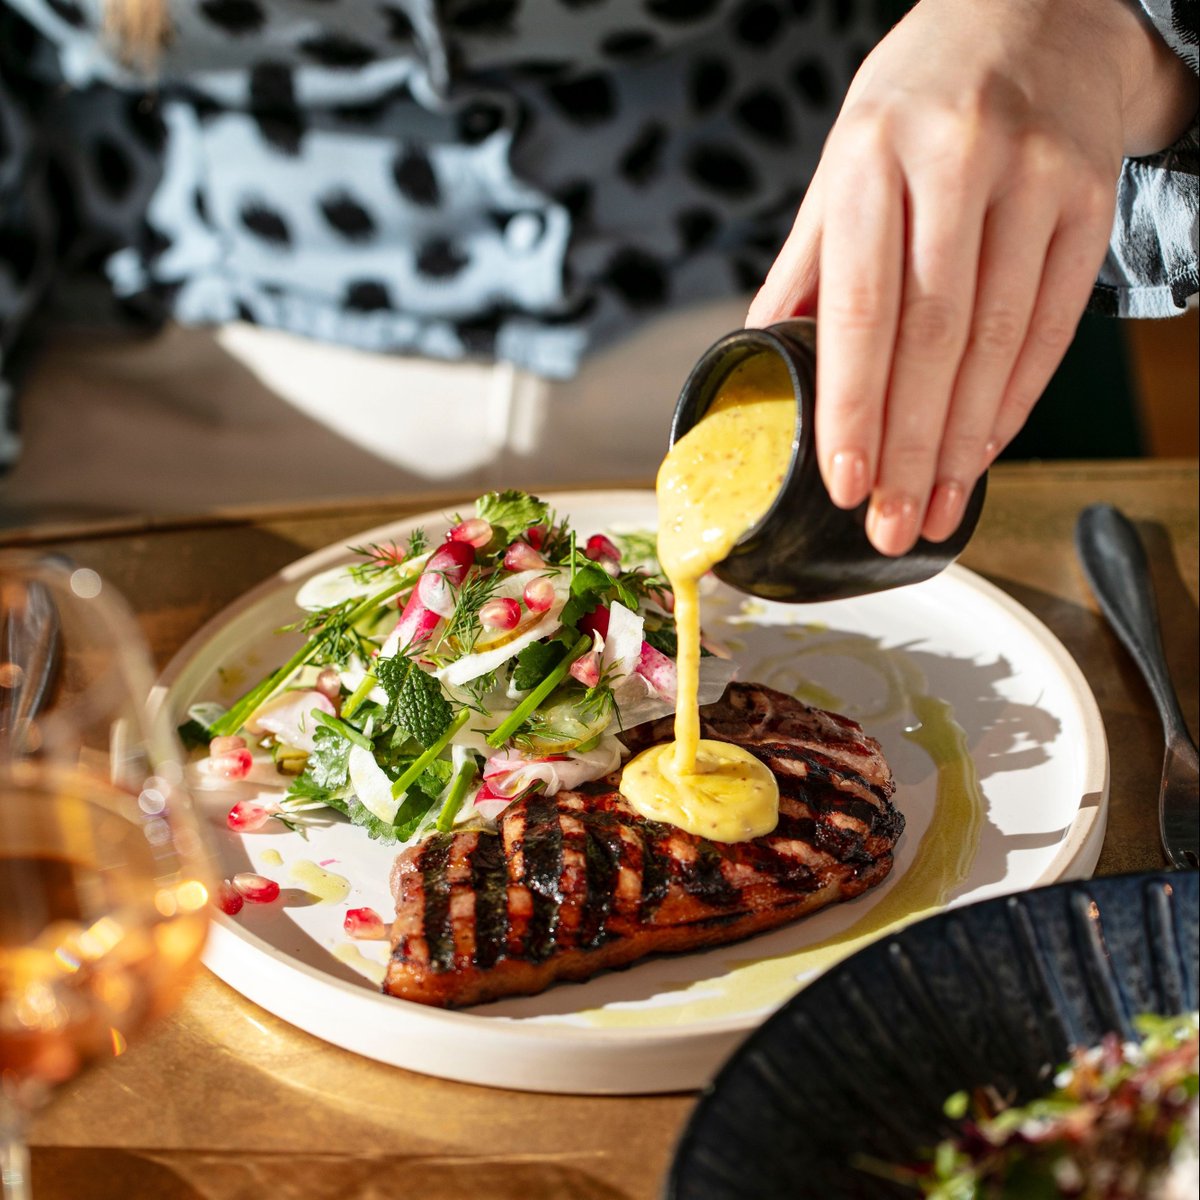 Our bacon chop with radish, celeriac, fennel and cornichon salad with mustard cream.